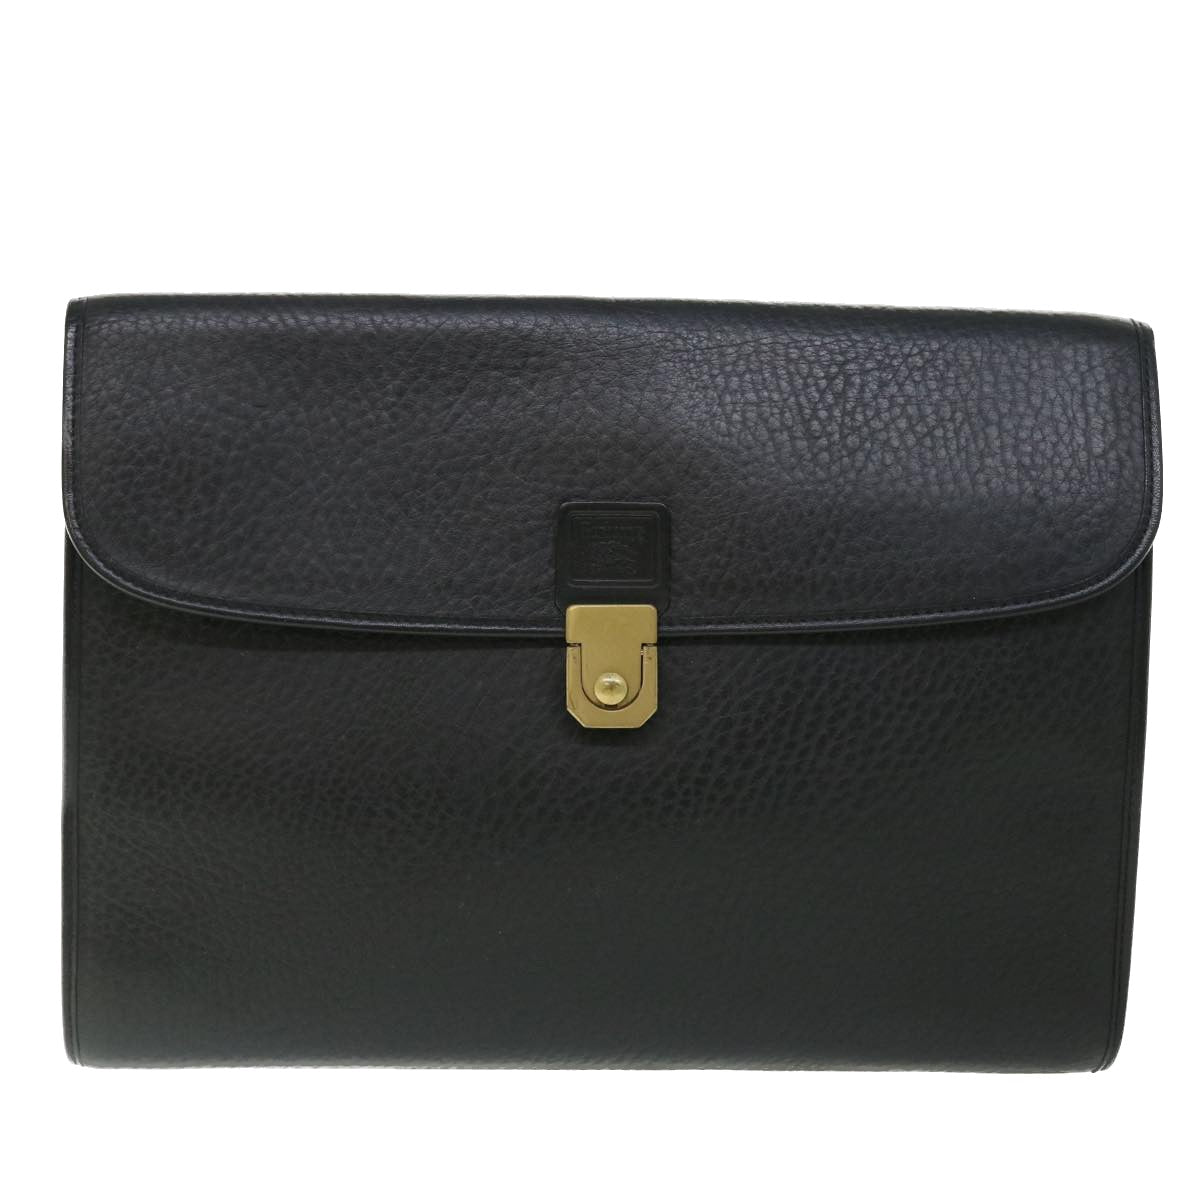 Burberrys Briefcase Leather Black Auth bs7548